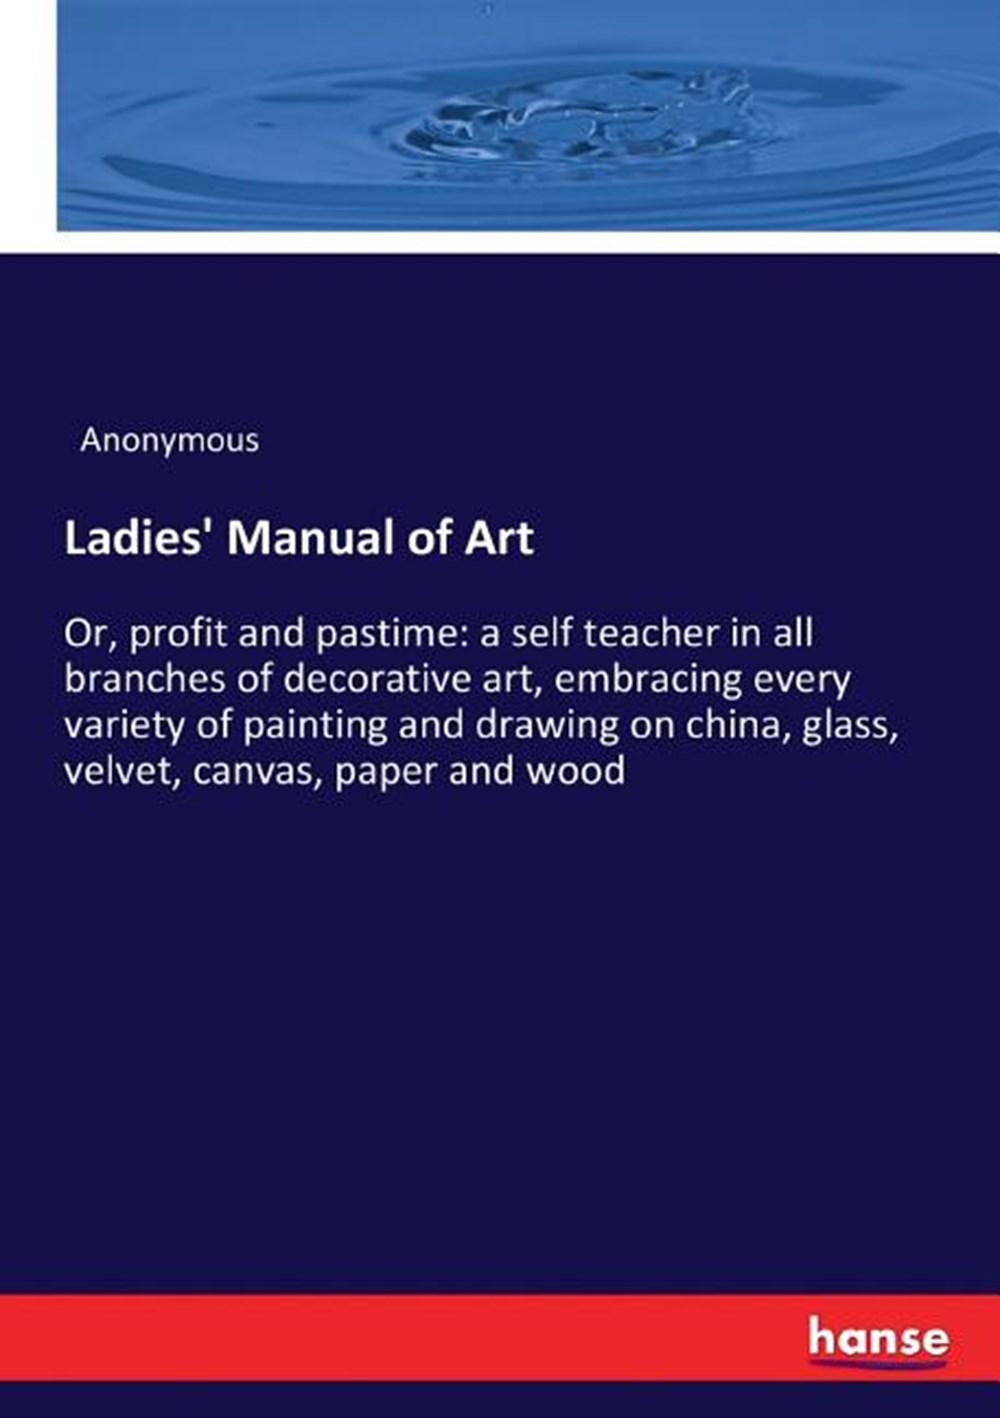 Ladies' Manual of Art: Or, profit and pastime: a self teacher in all branches of decorative art, emb